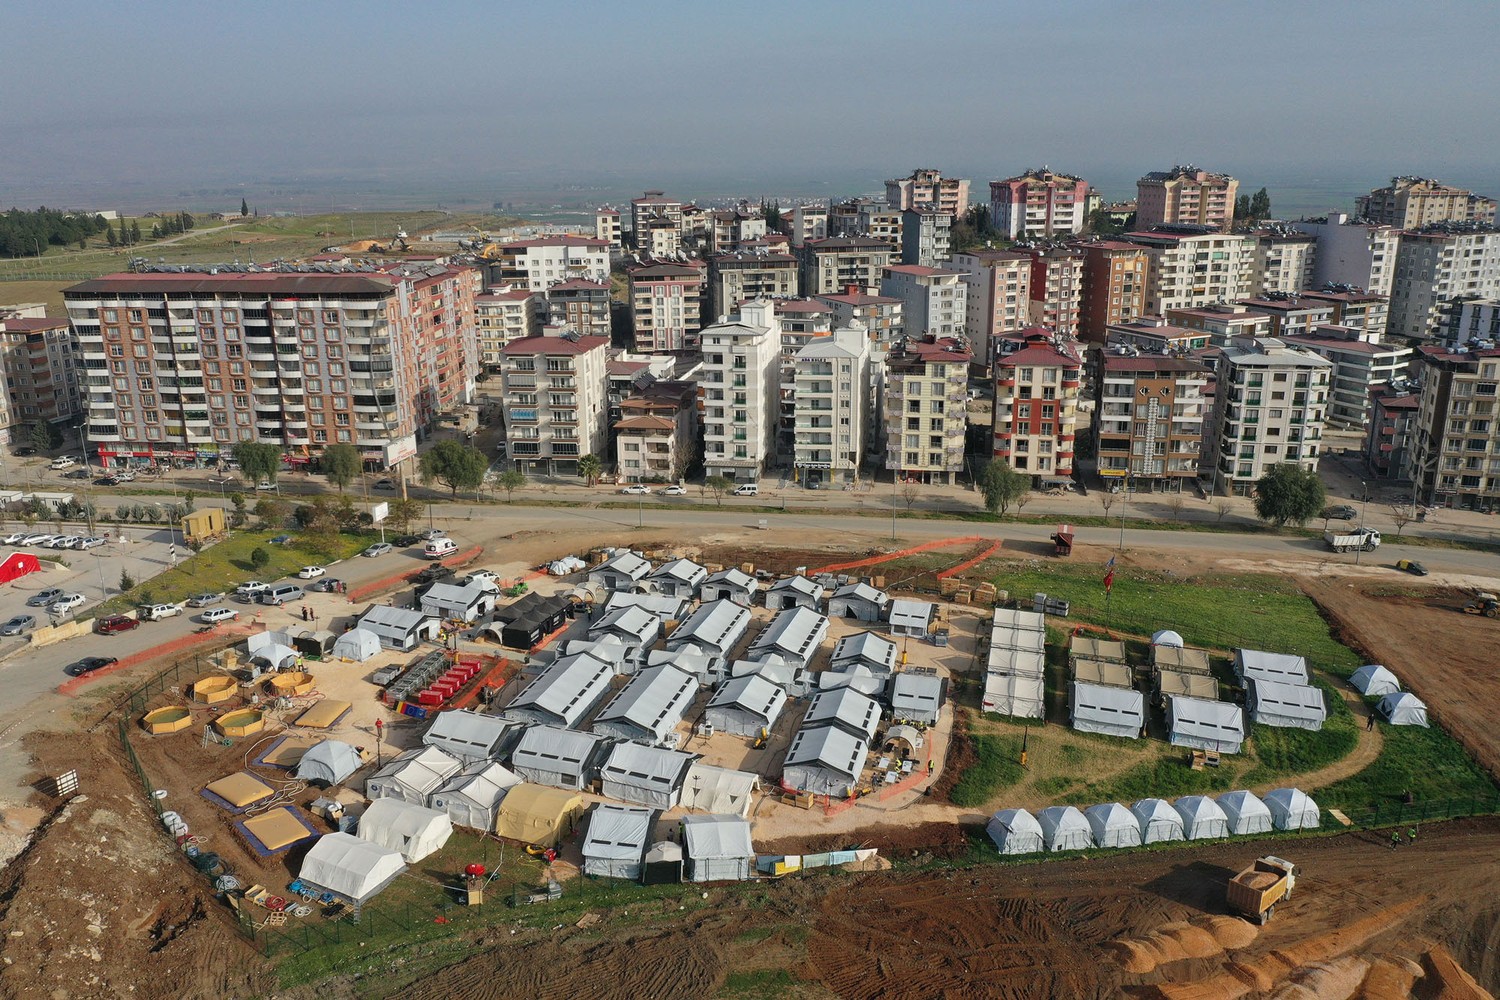 An aerial view of a field hospital built by Belgium in the Kırıkhan district of Turkey's Hatay province, seen on February 28, 2023